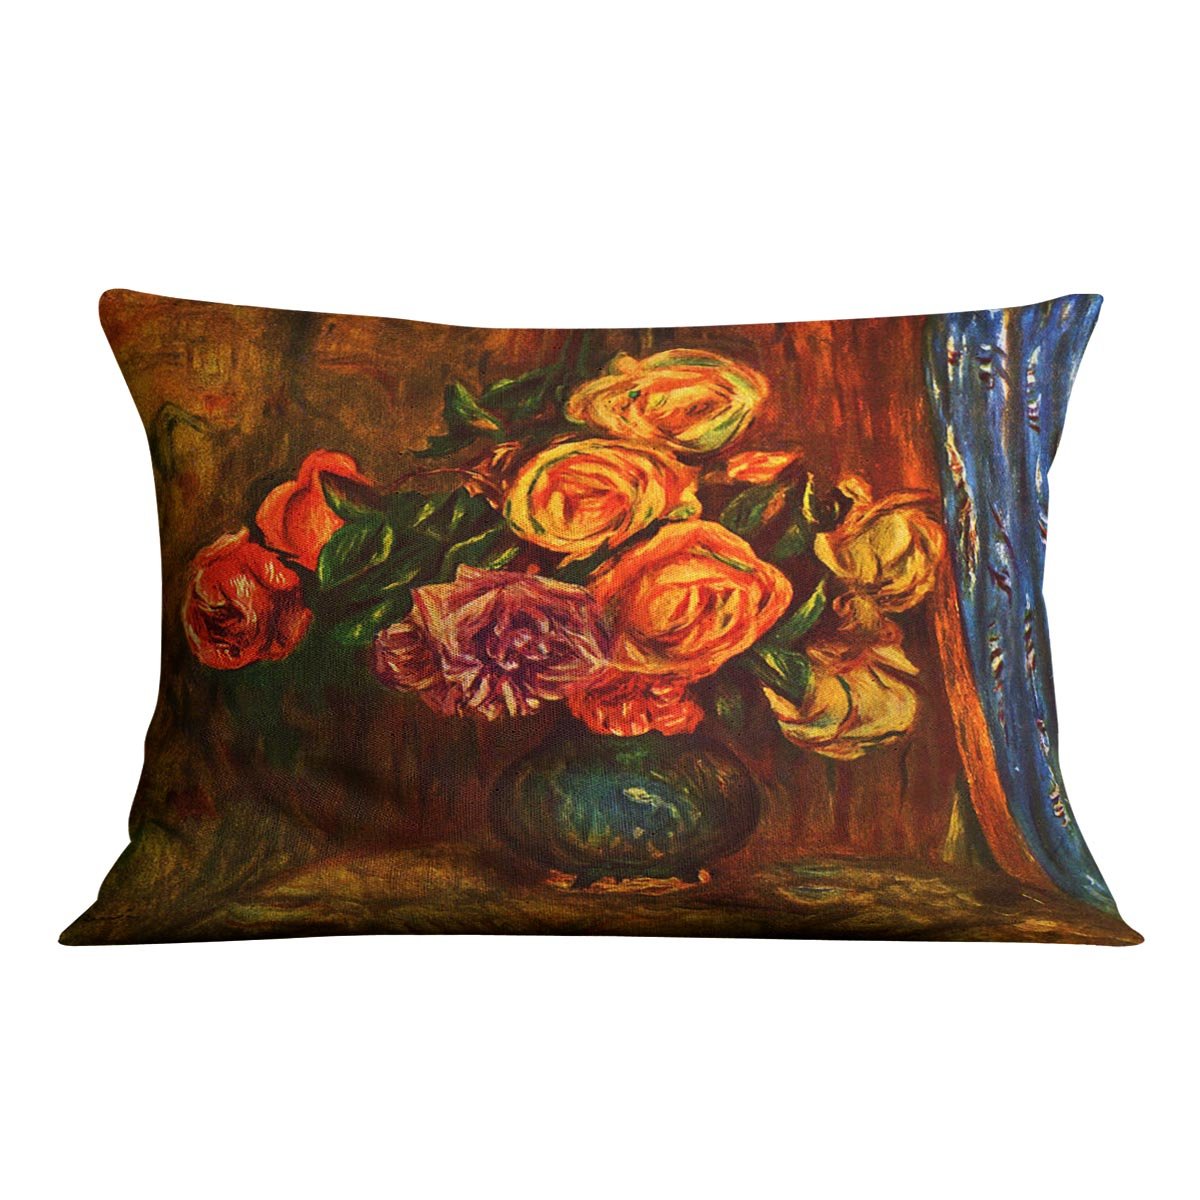 Still life roses before a blue curtain by Renoir Throw Pillow